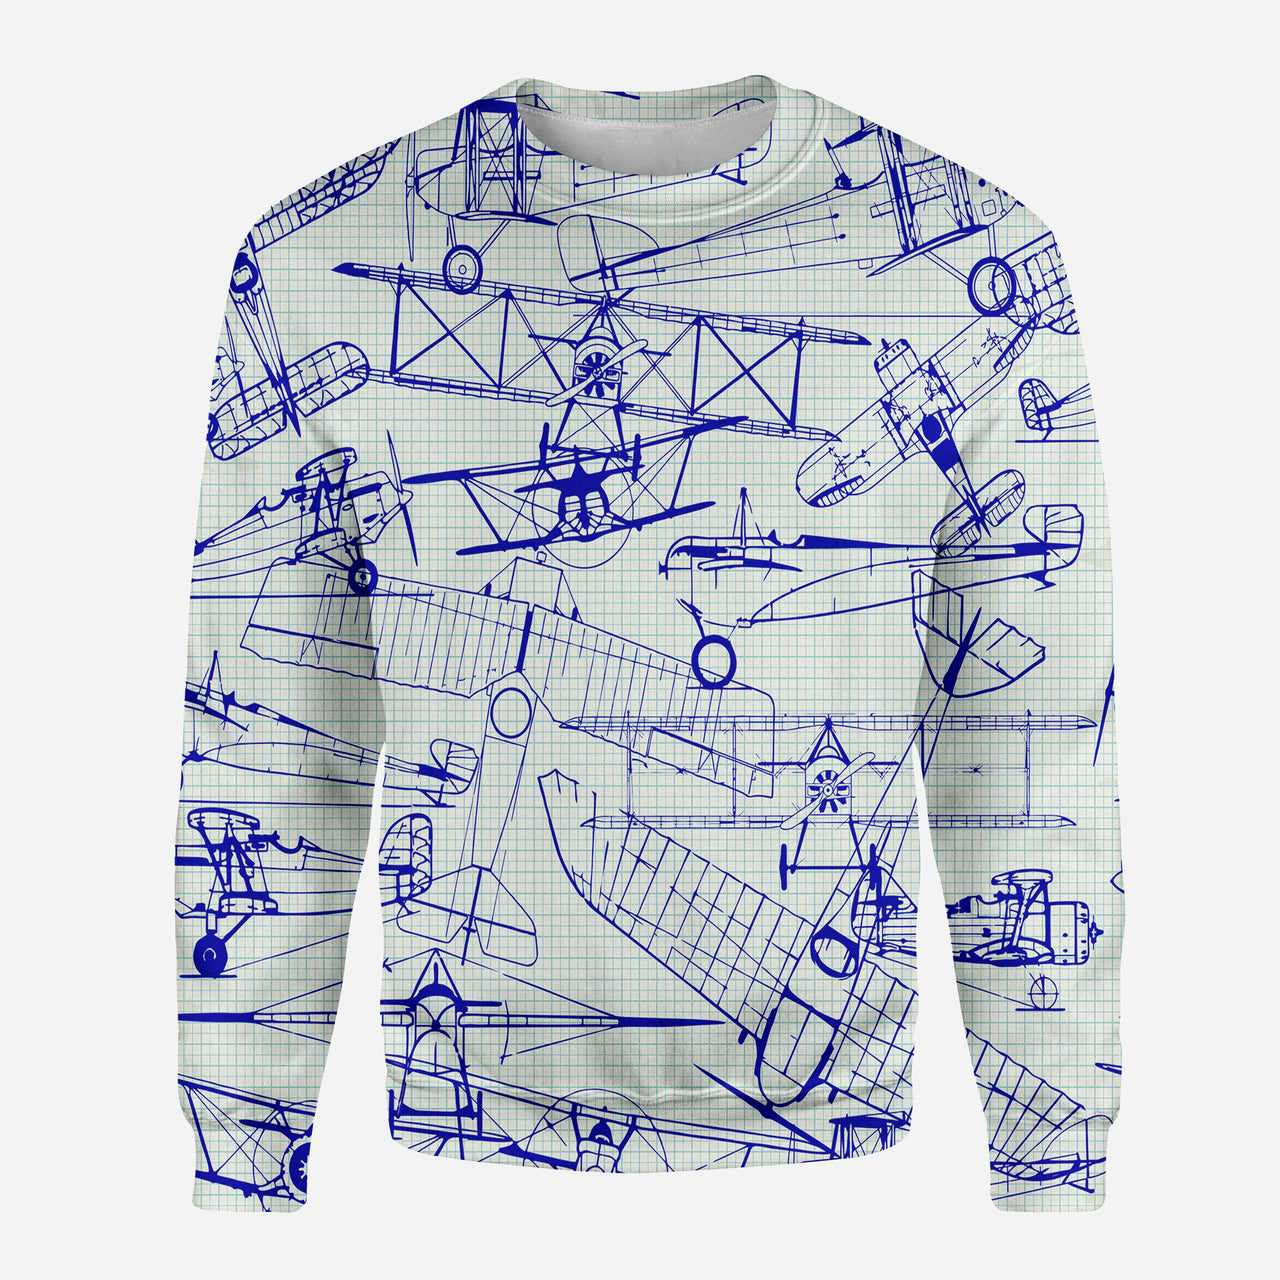 Amazing Drawings of Old Aircrafts Designed 3D Sweatshirts